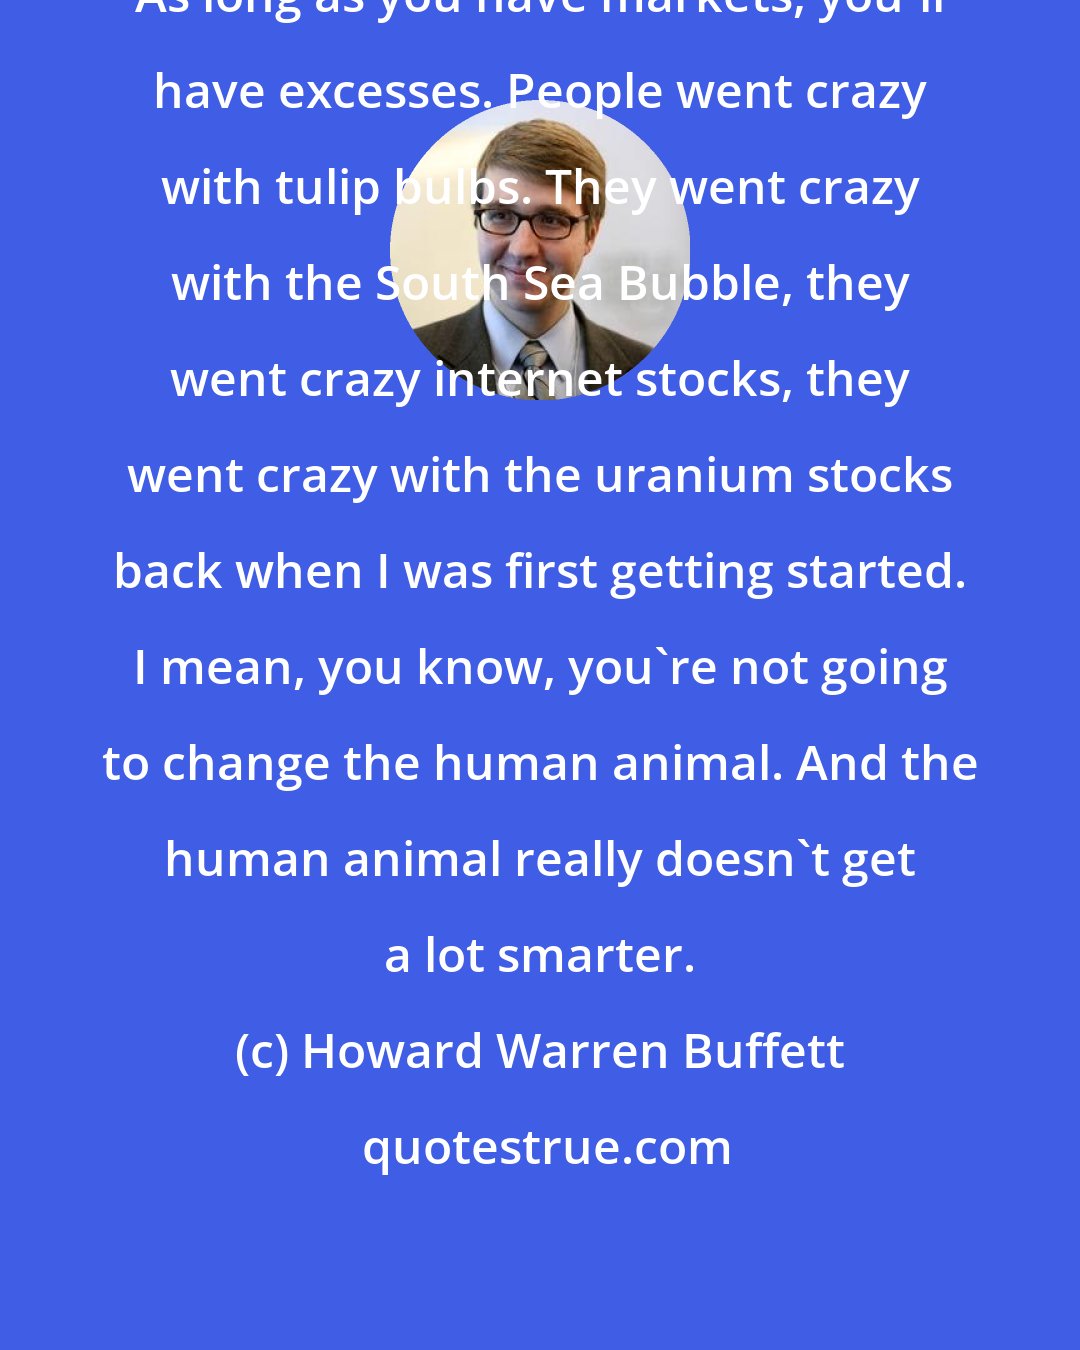 Howard Warren Buffett: As long as you have markets, you'll have excesses. People went crazy with tulip bulbs. They went crazy with the South Sea Bubble, they went crazy internet stocks, they went crazy with the uranium stocks back when I was first getting started. I mean, you know, you're not going to change the human animal. And the human animal really doesn't get a lot smarter.